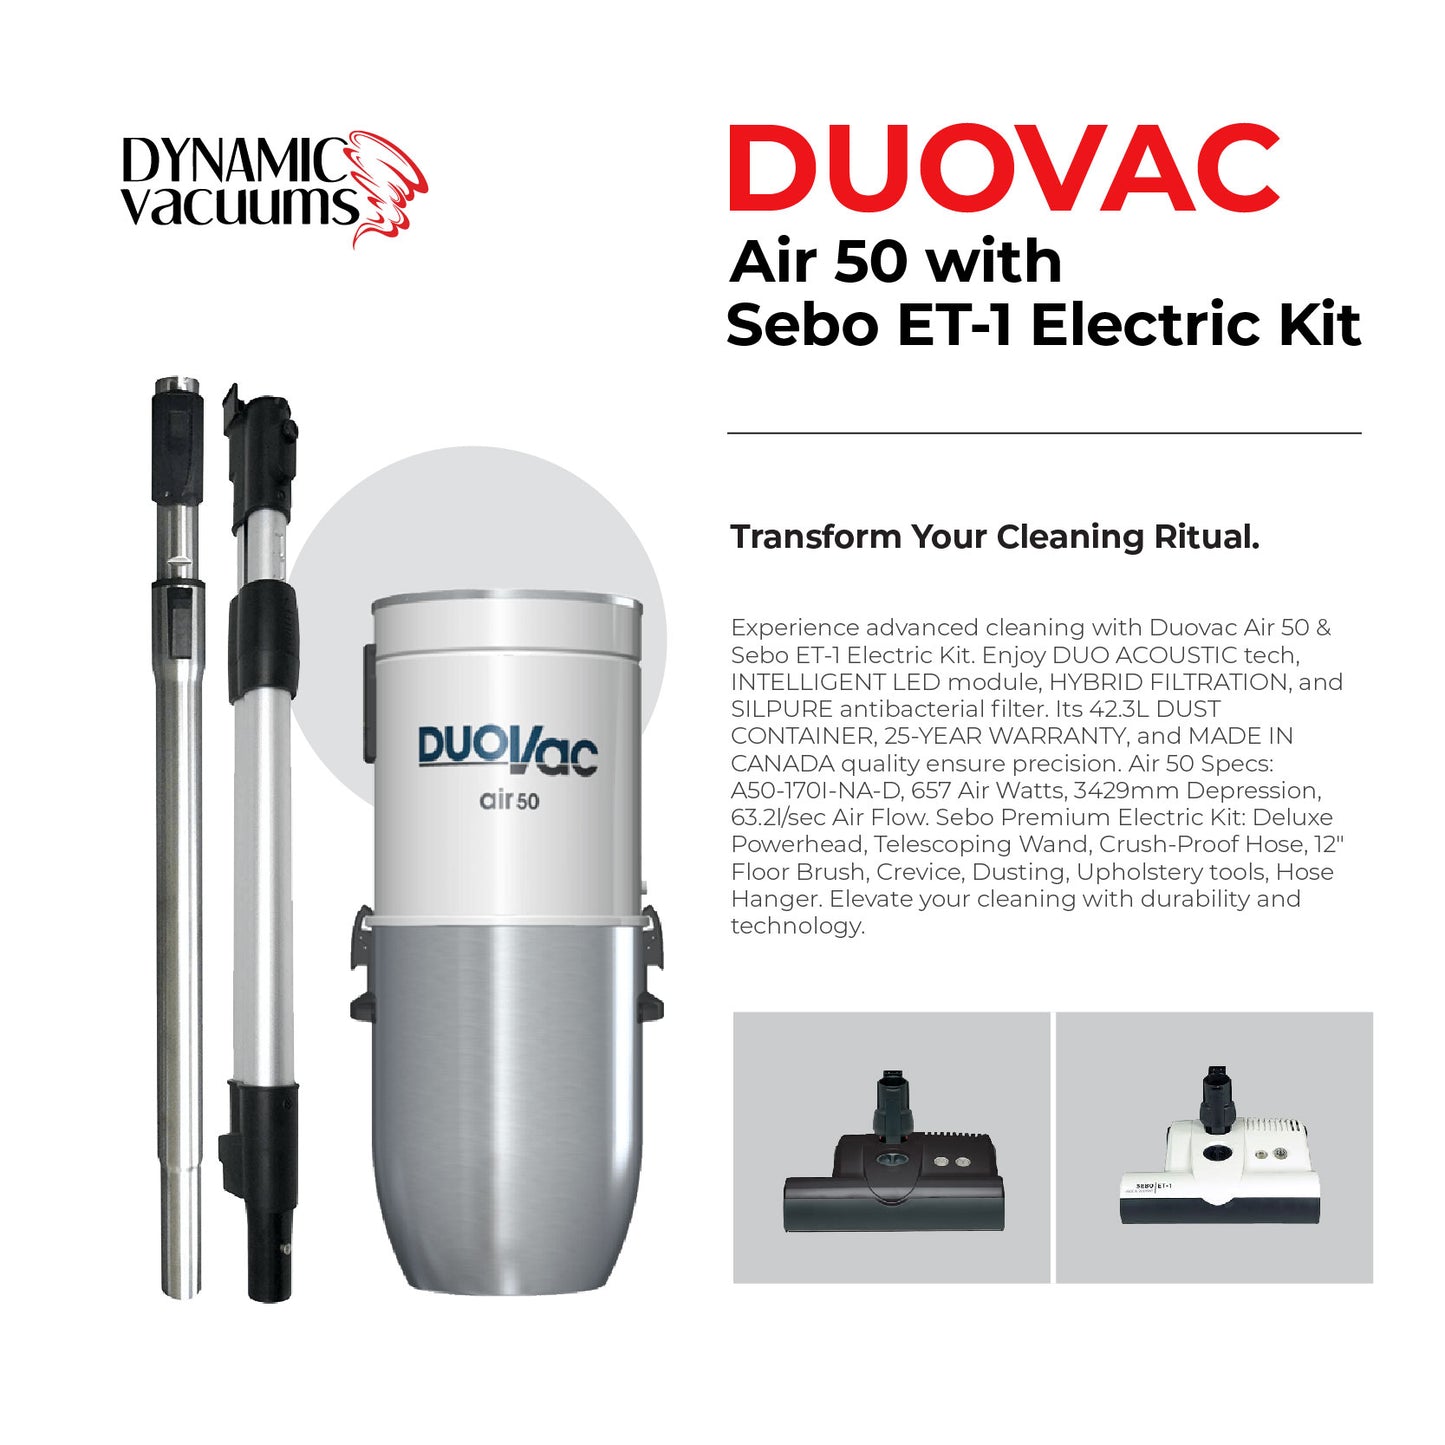 Duovac Air 50 with Sebo ET-1 Electric Kit